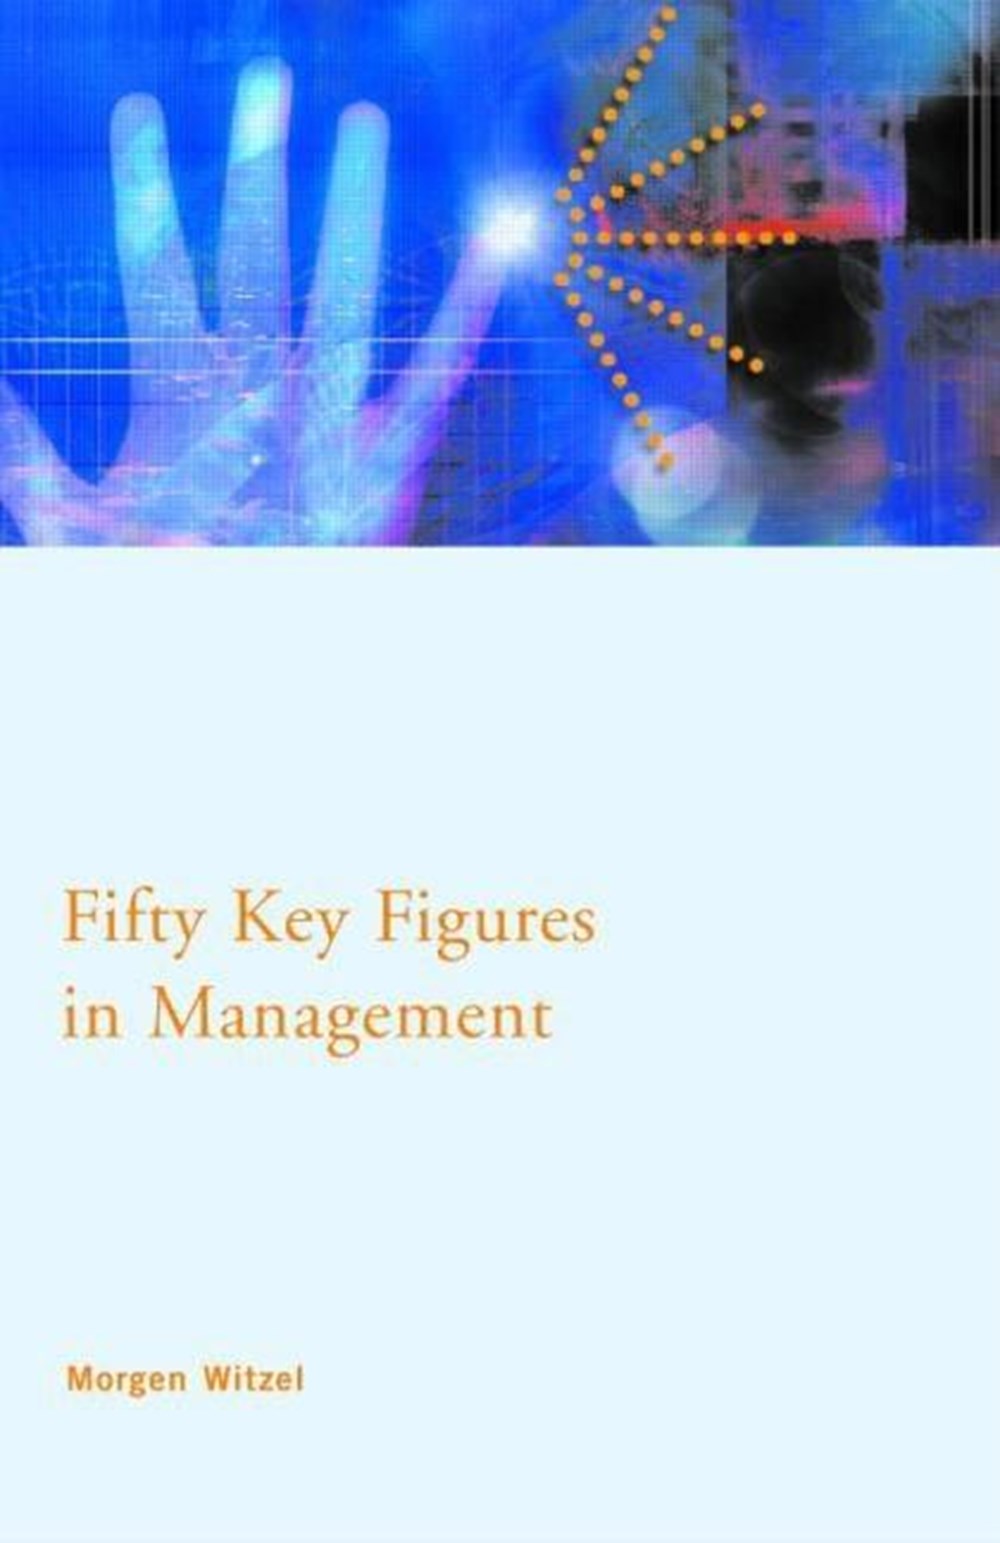 Fifty Key Figures in Management (UK)